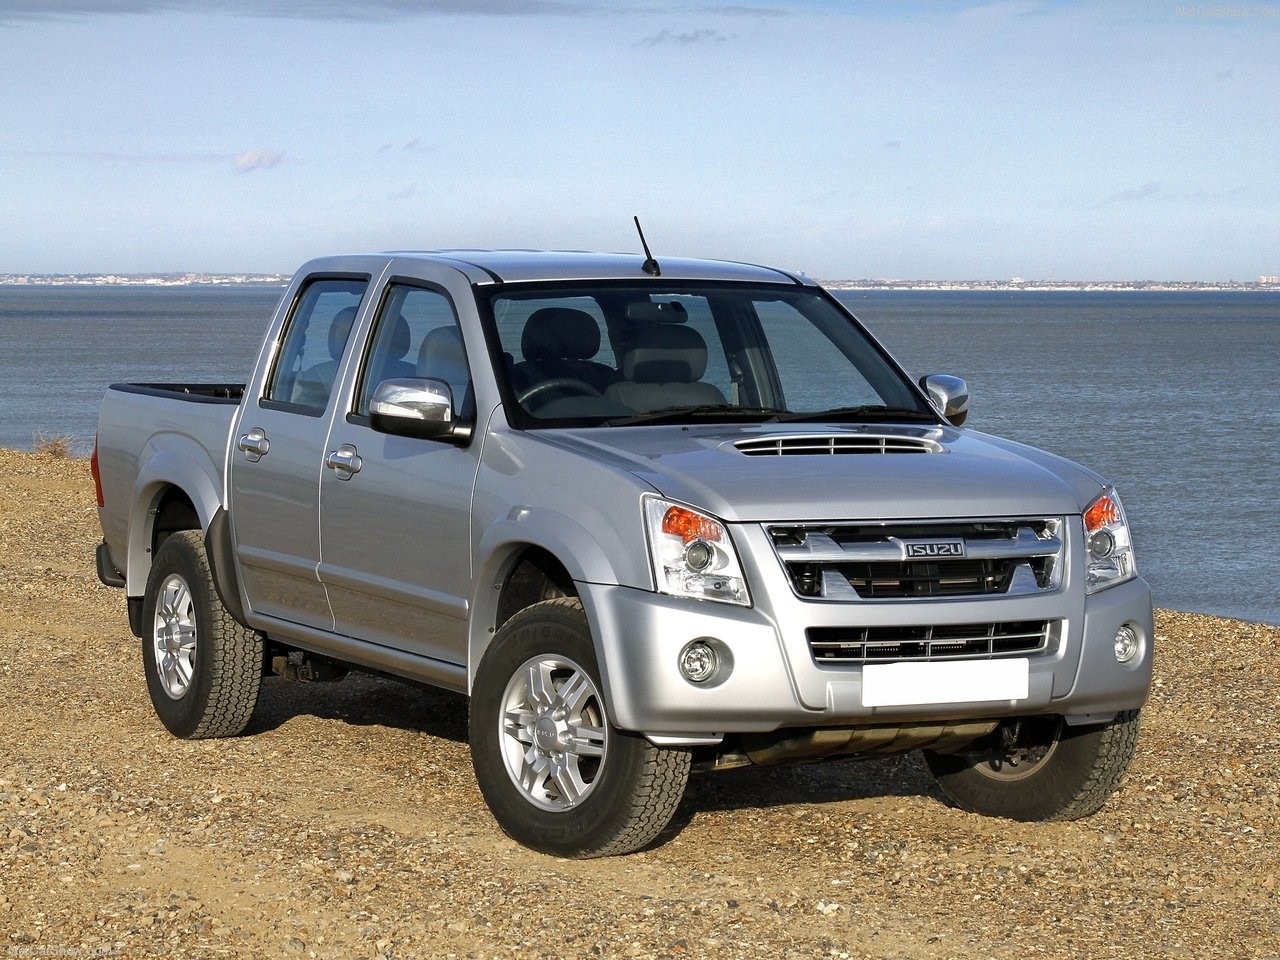 Isuzu Rodeo (2003-2012) review - pros and cons